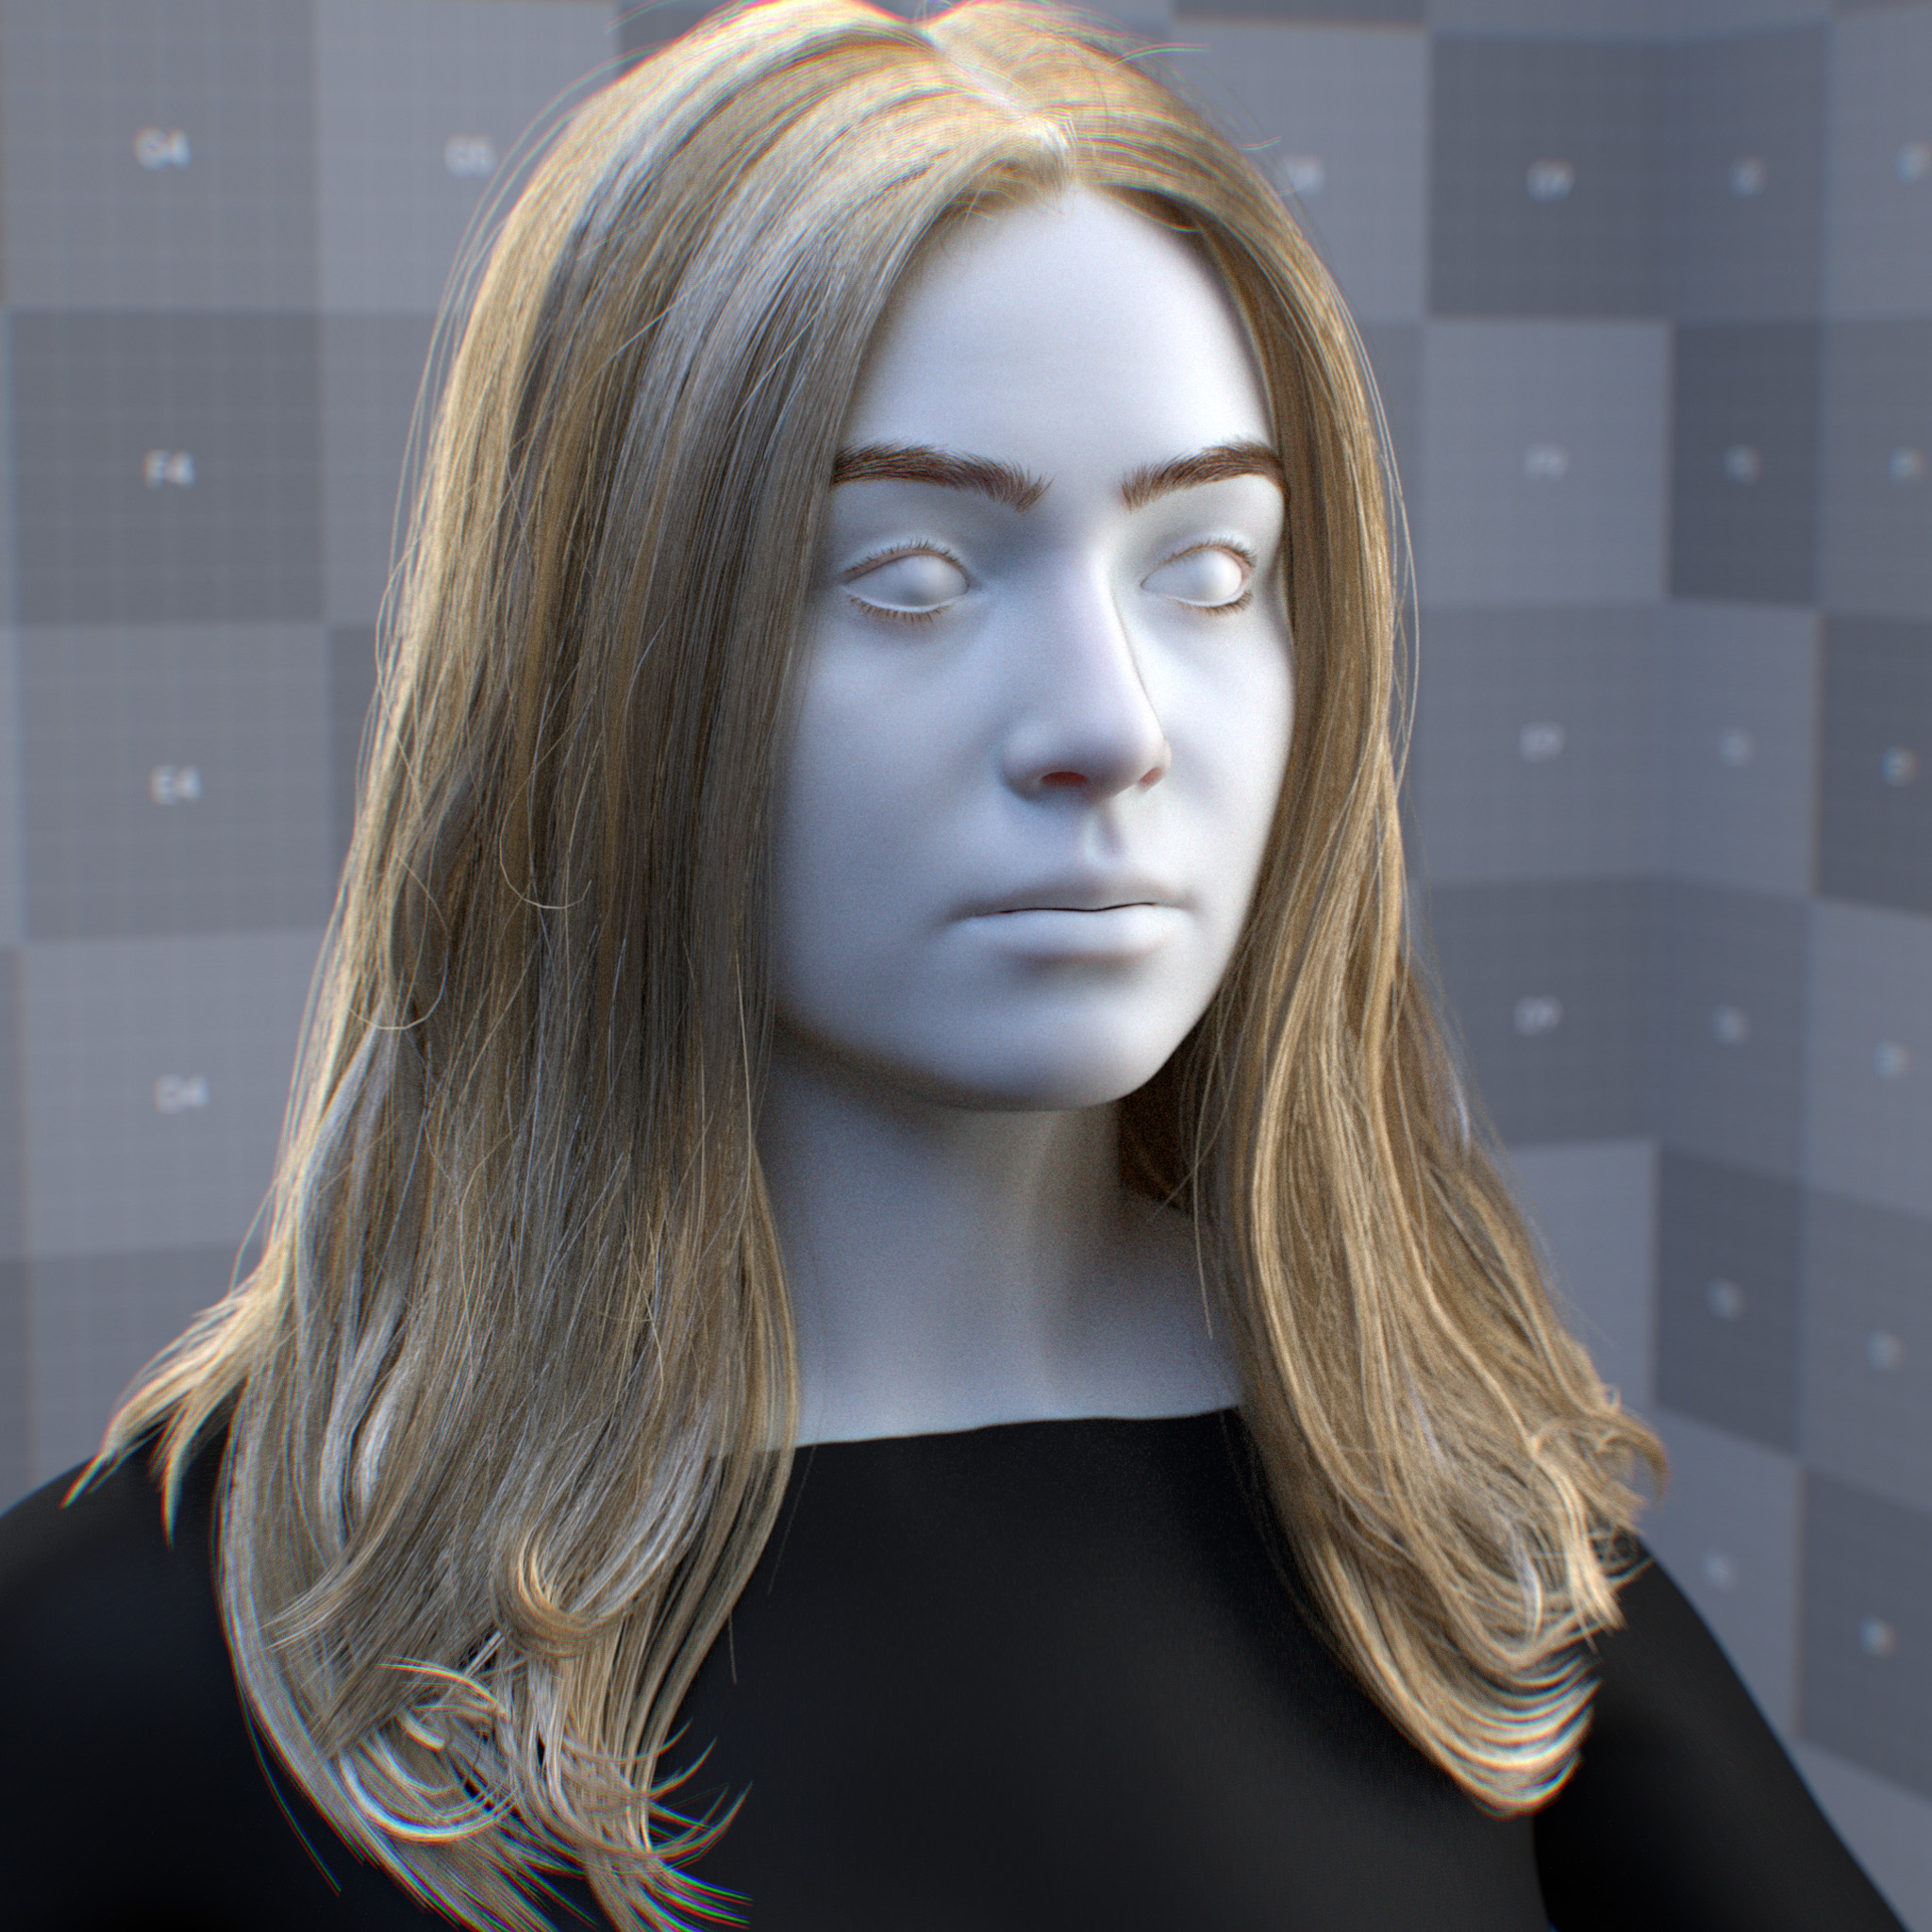 rtx_material_omnihairbase_specular_reflection_azimuthal_roughness_w0p3